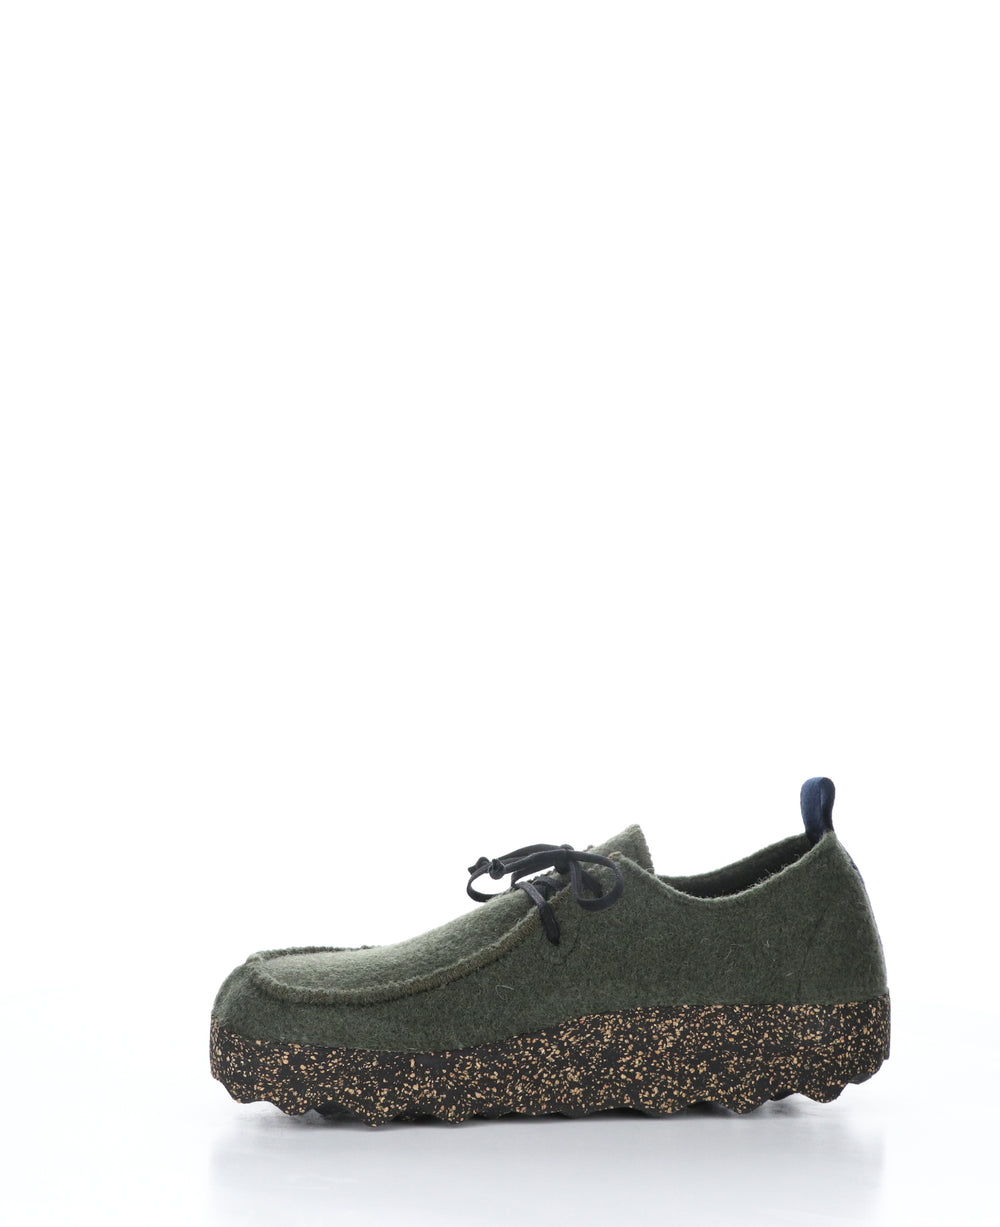 CHAT060ASPM Military Green Round Toe Shoes|CHAT060ASPM Chaussures à Bout Rond in Vert